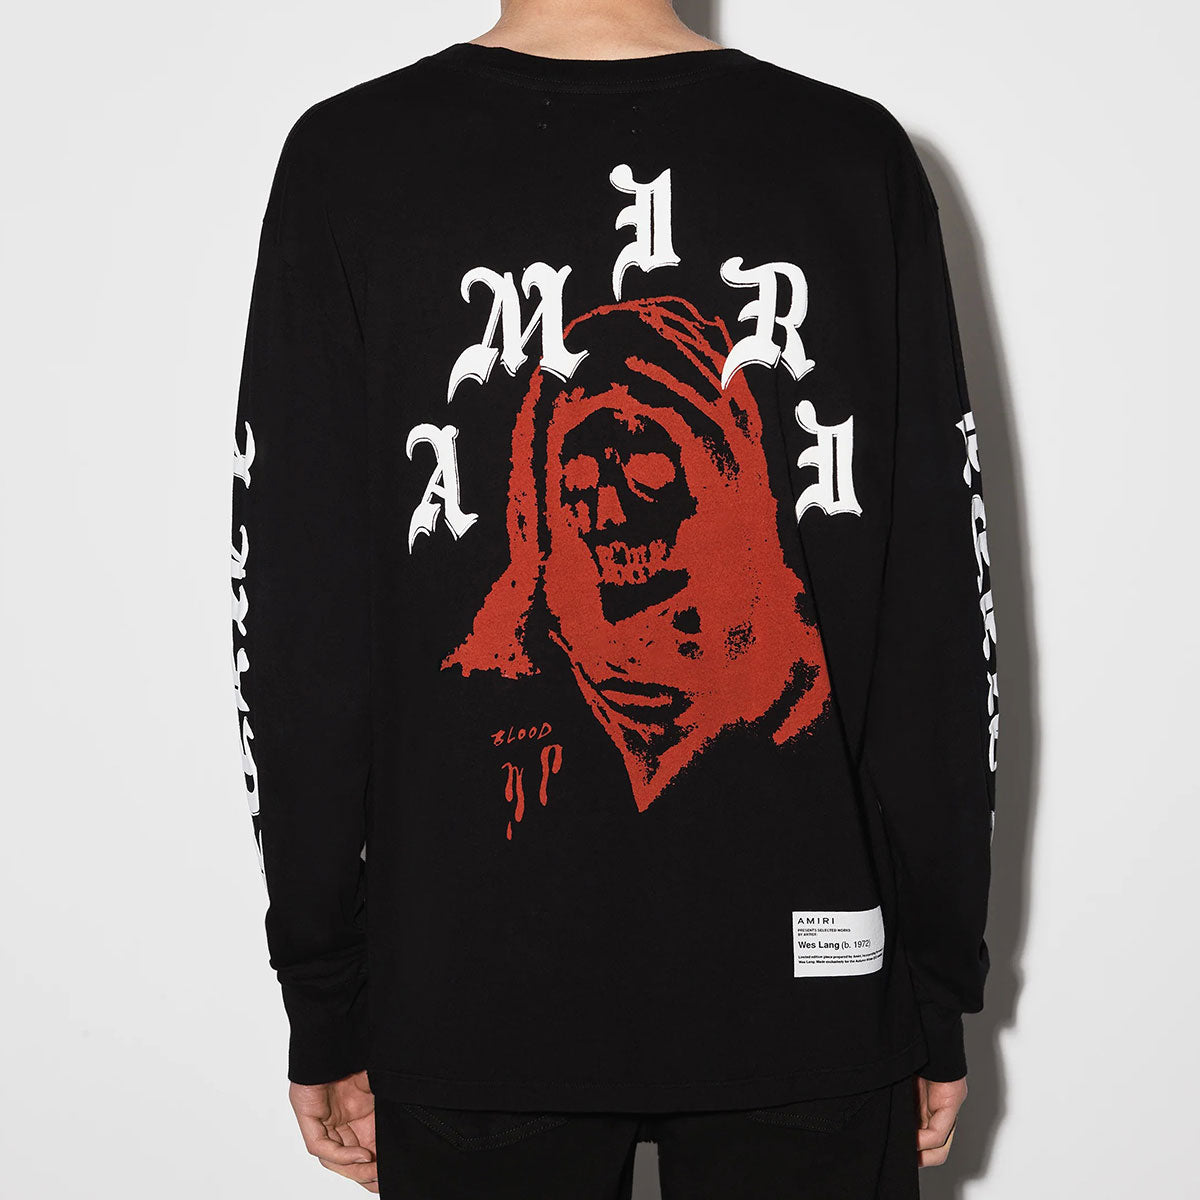 WES LANG SOLAR KINGS L/S TEE - Why are you here?